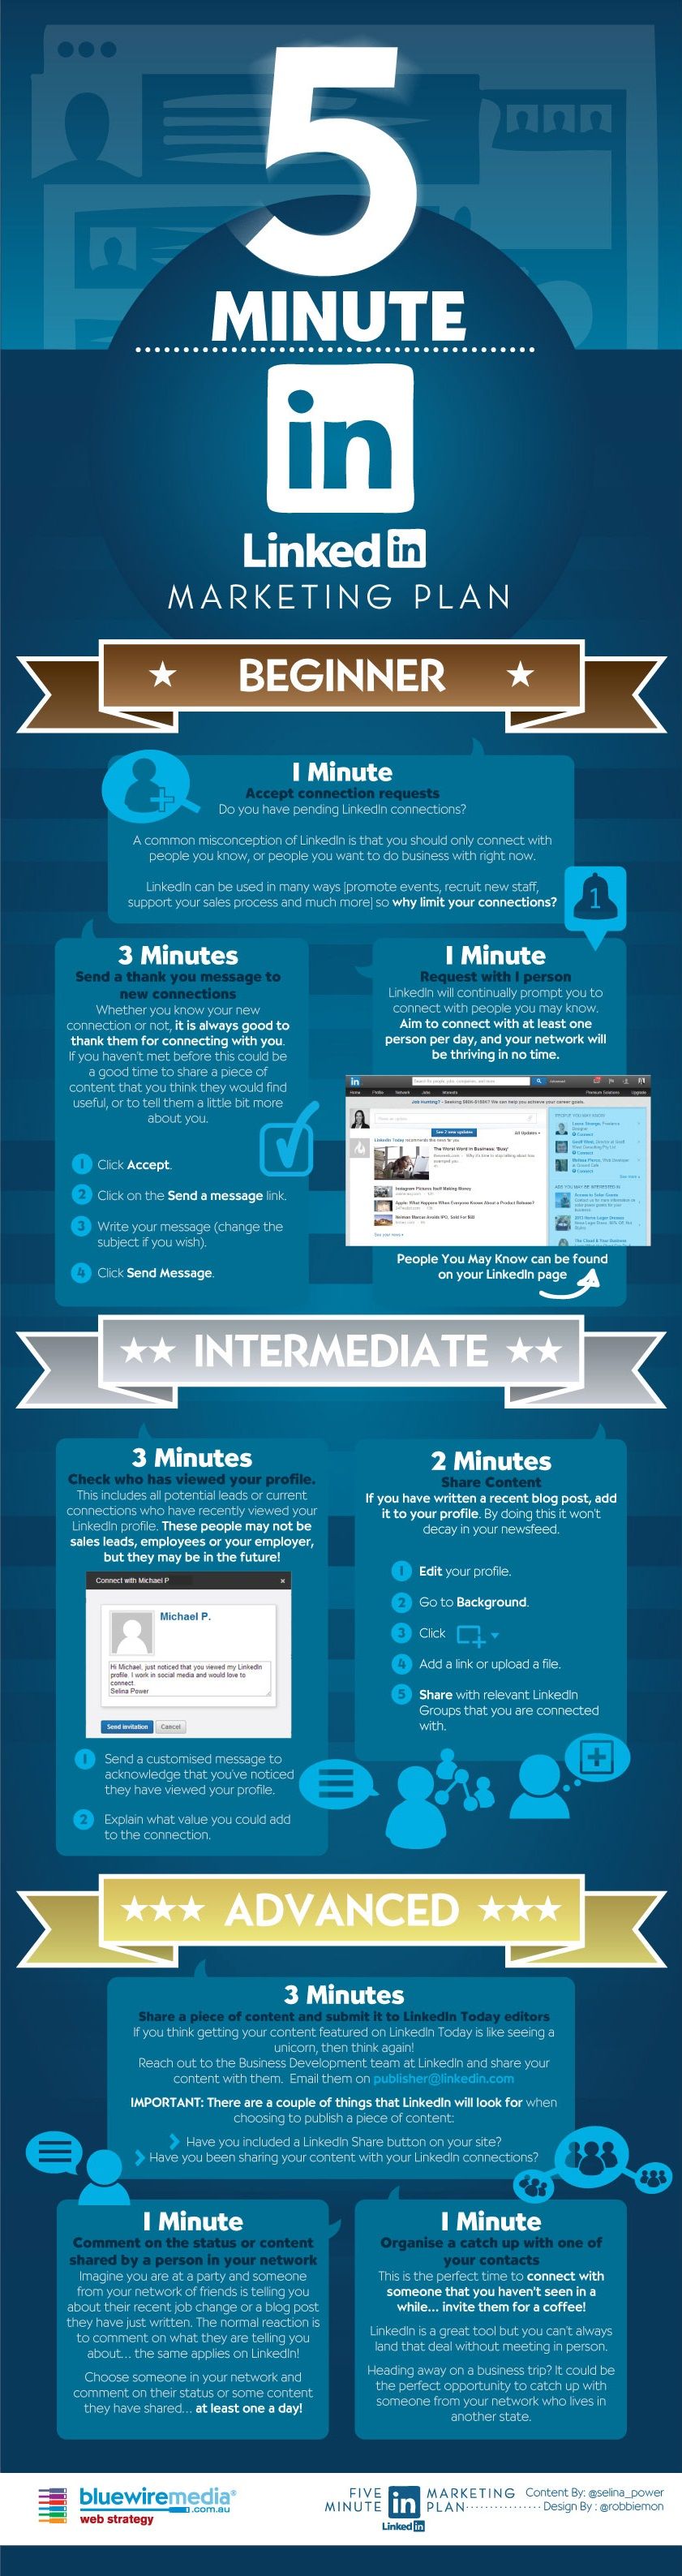 5 Minute Linkedin Management Plan for Users of All Levels [Infographic]